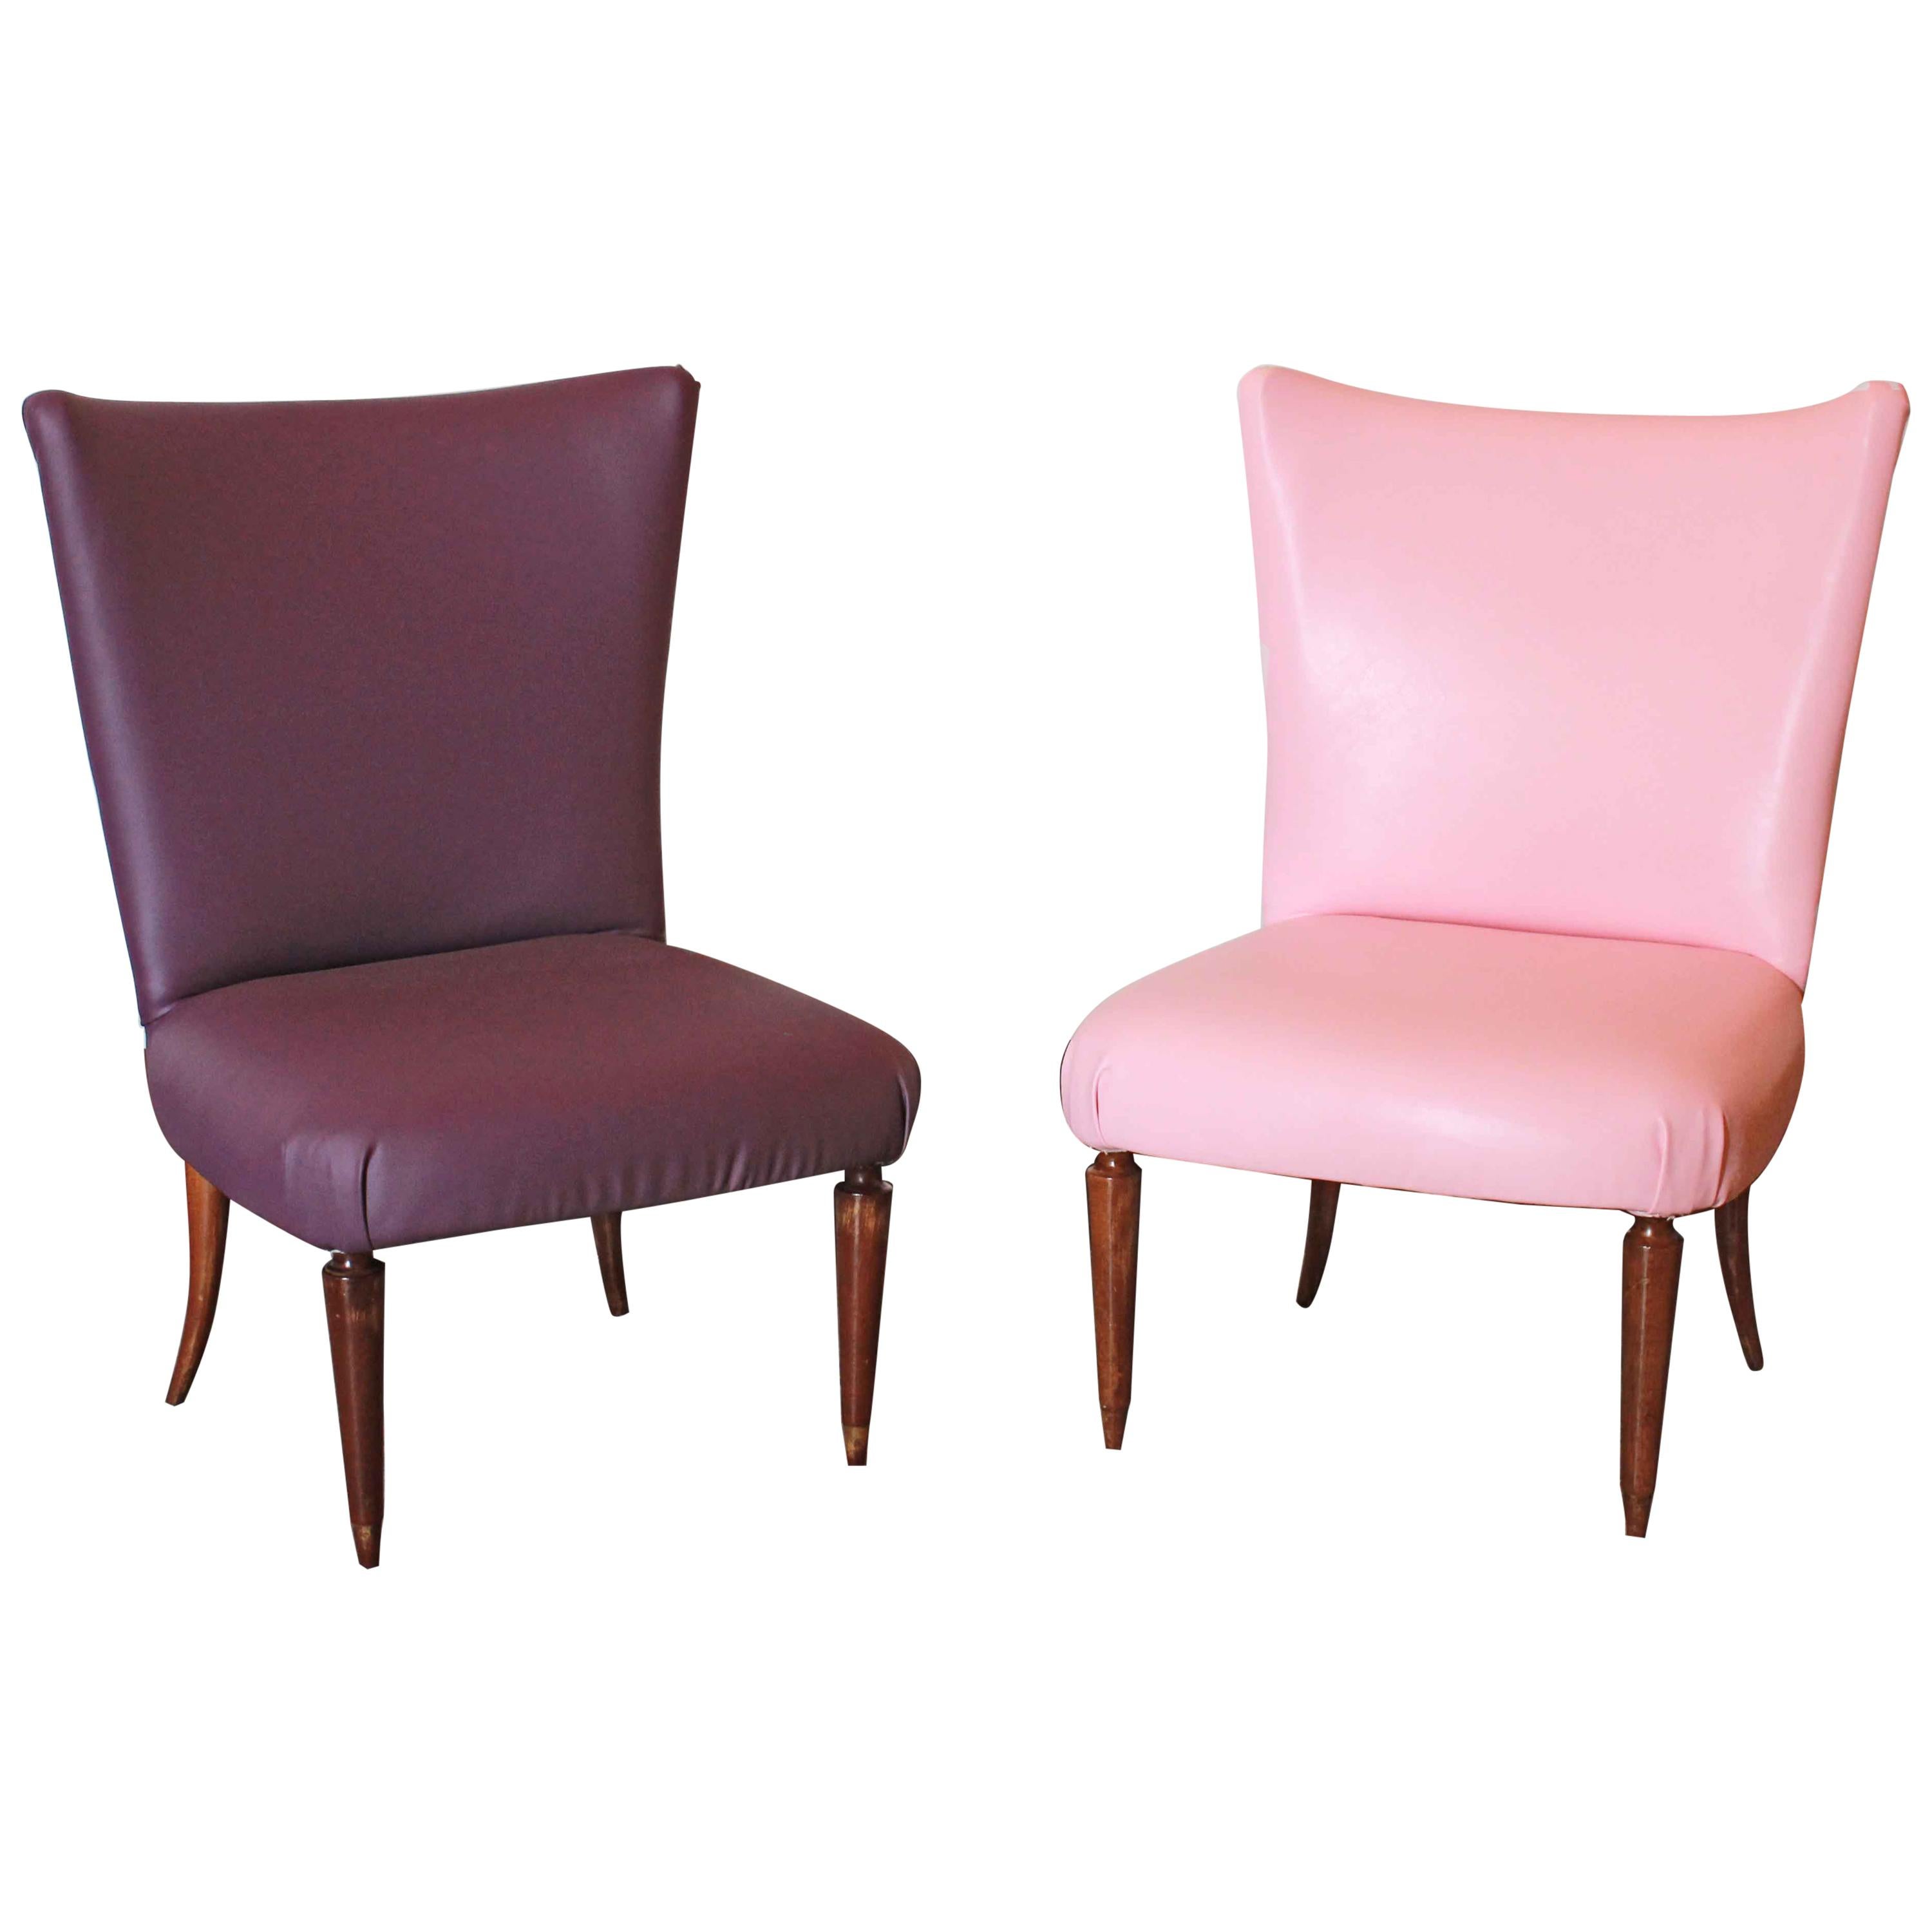 1950s Italian vintage Chairs Restyled with Leatherette